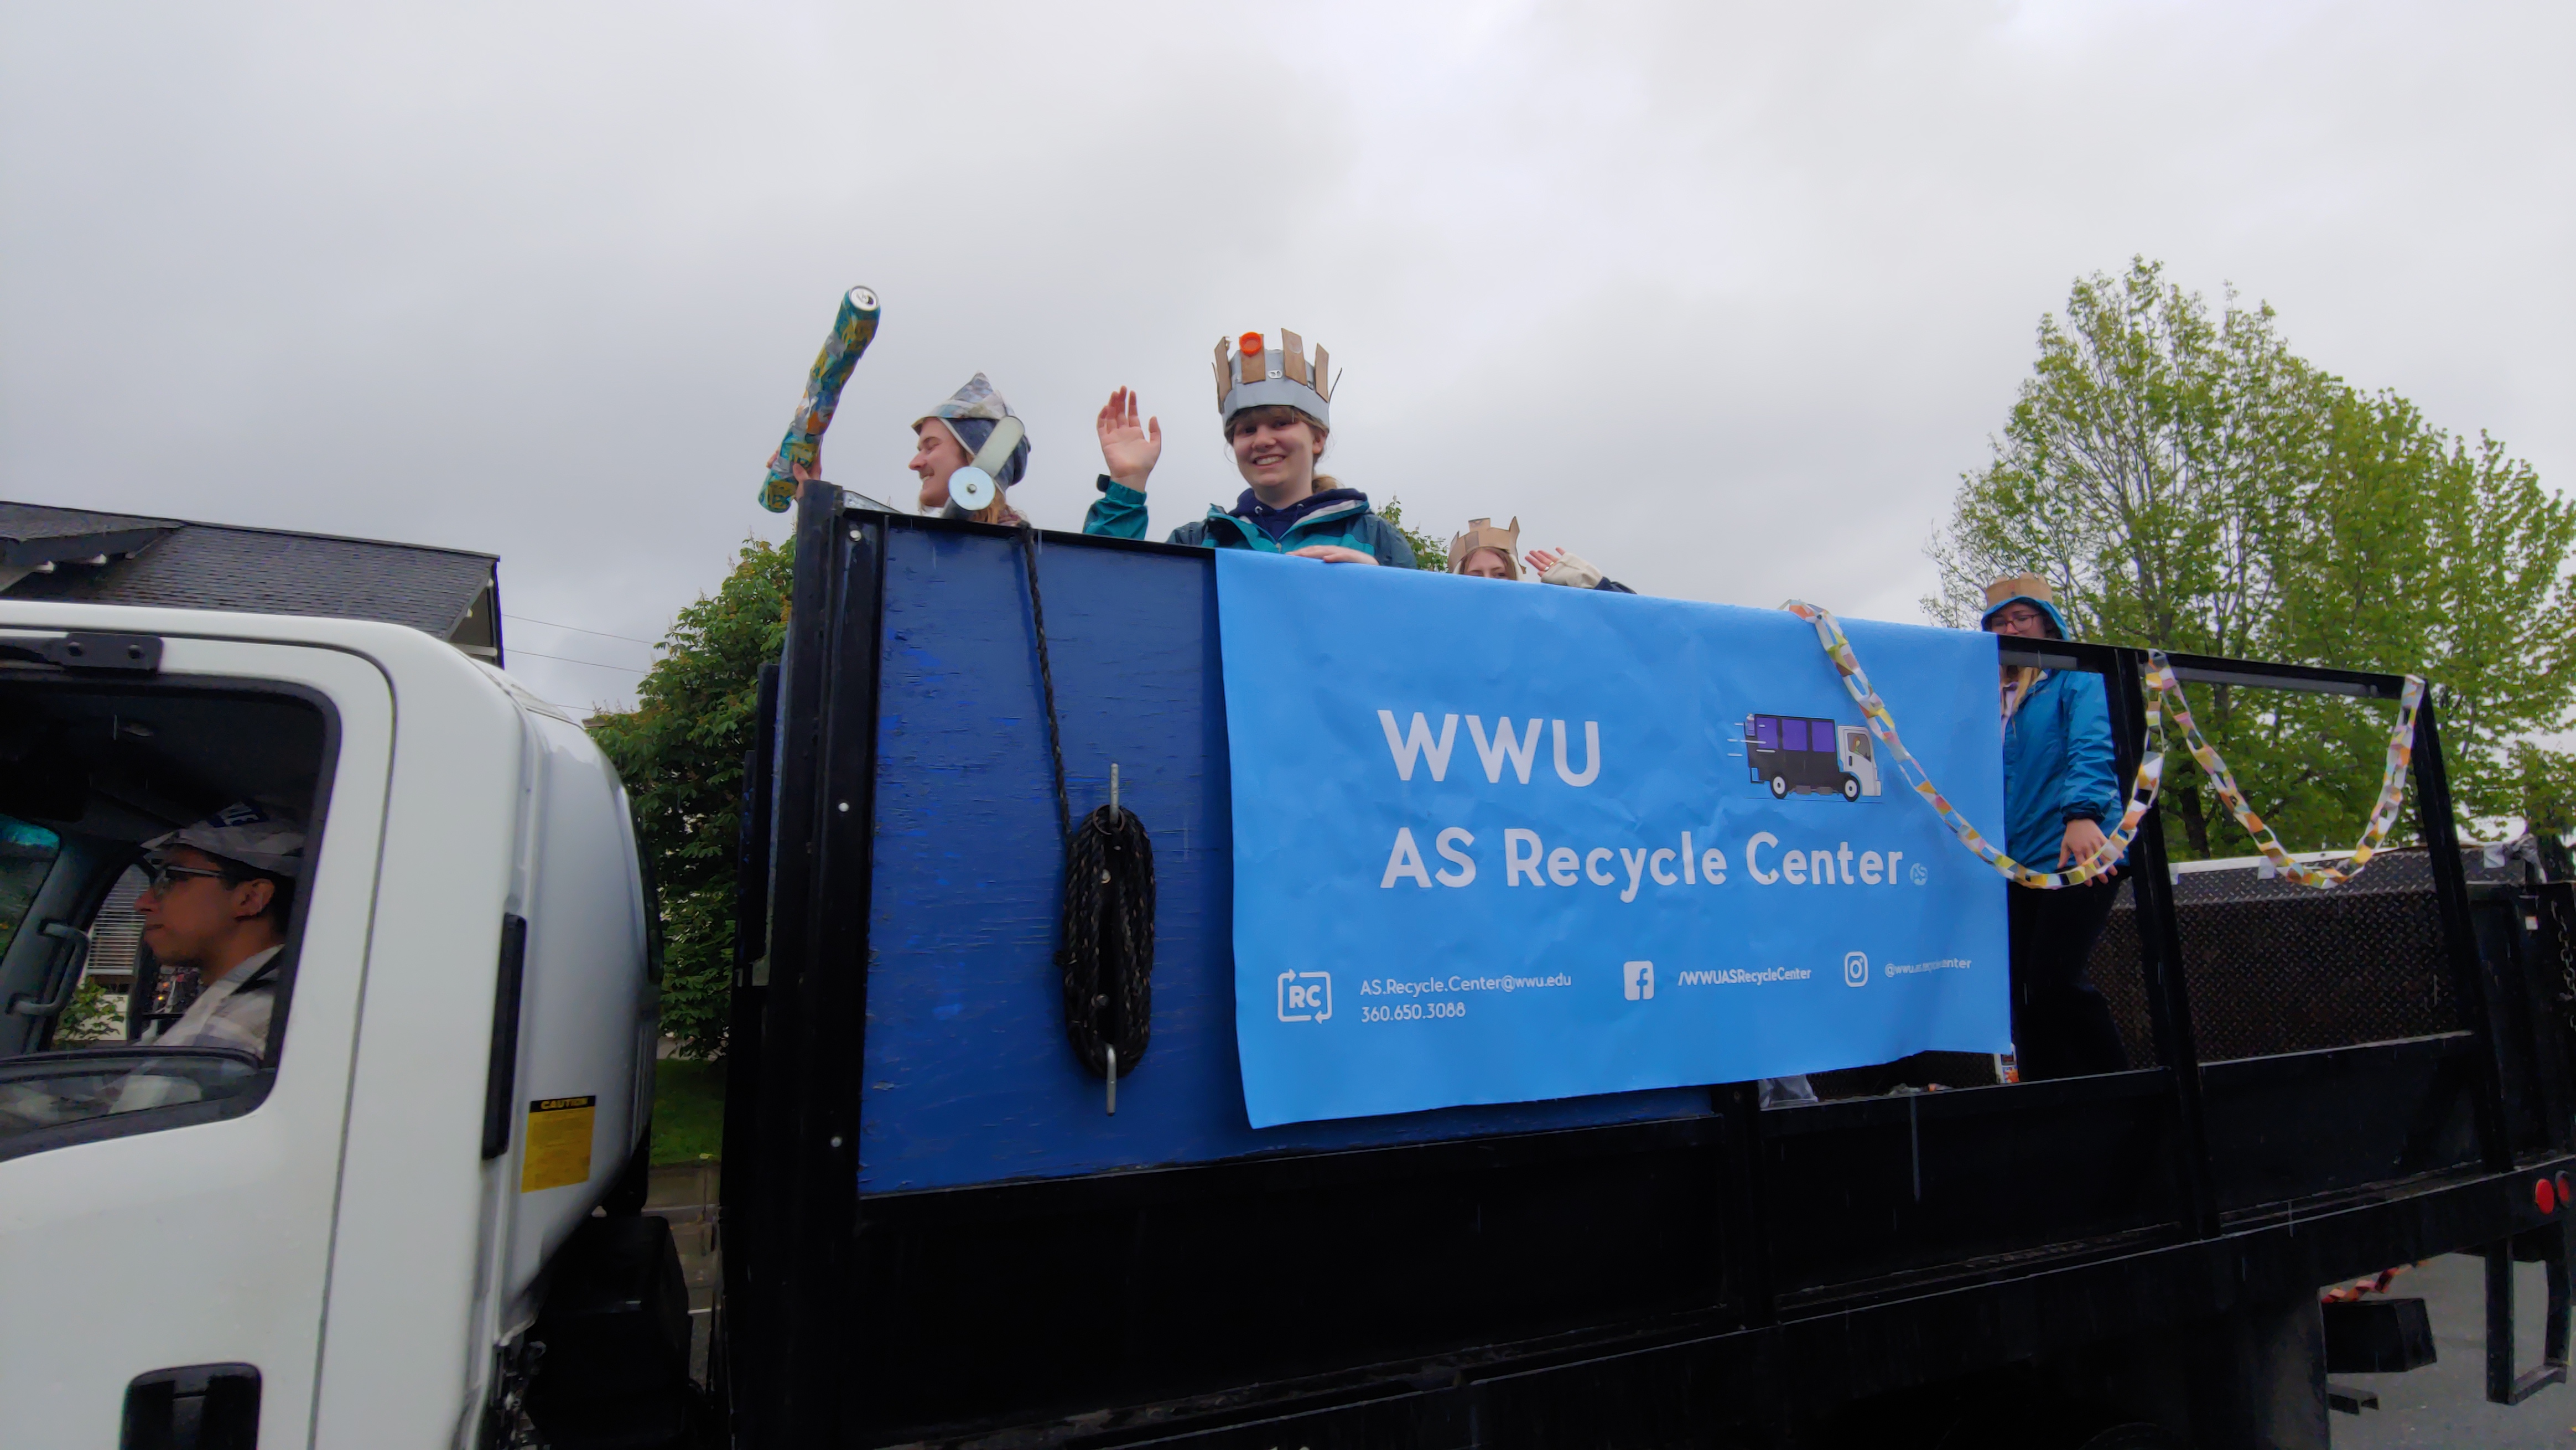 students wave from the back of a truck with a banner, &quot;WWU AS Recycle Center.&quot; The students appear to be wearing hats and crowns made from recycled materials.